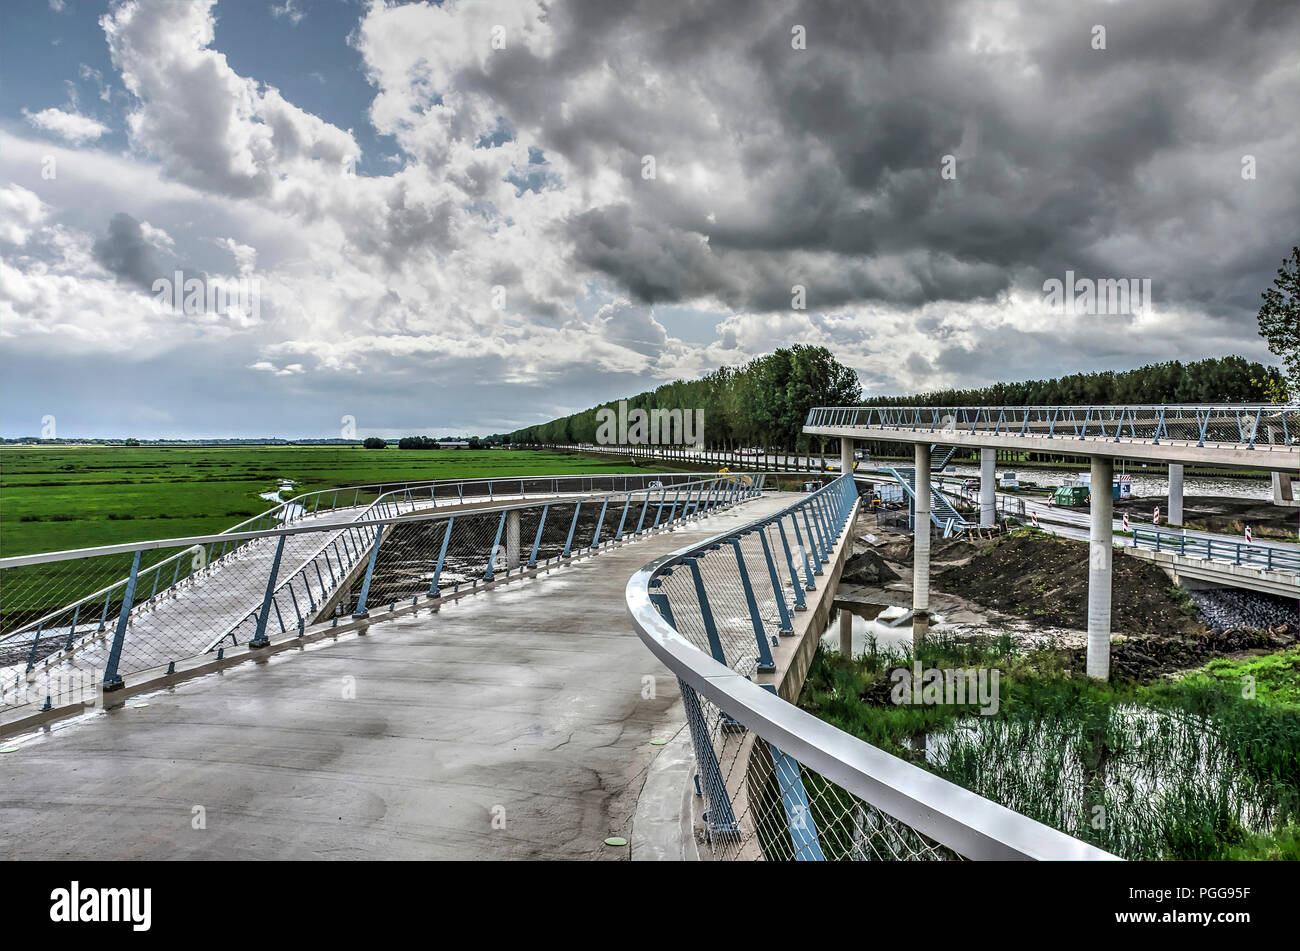 Nigtevecht, The Netherlands, August 25, 2018: view from the hairpin curves leading to the new bridge, with a dramatic sky over polders and long lines  Stock Photo